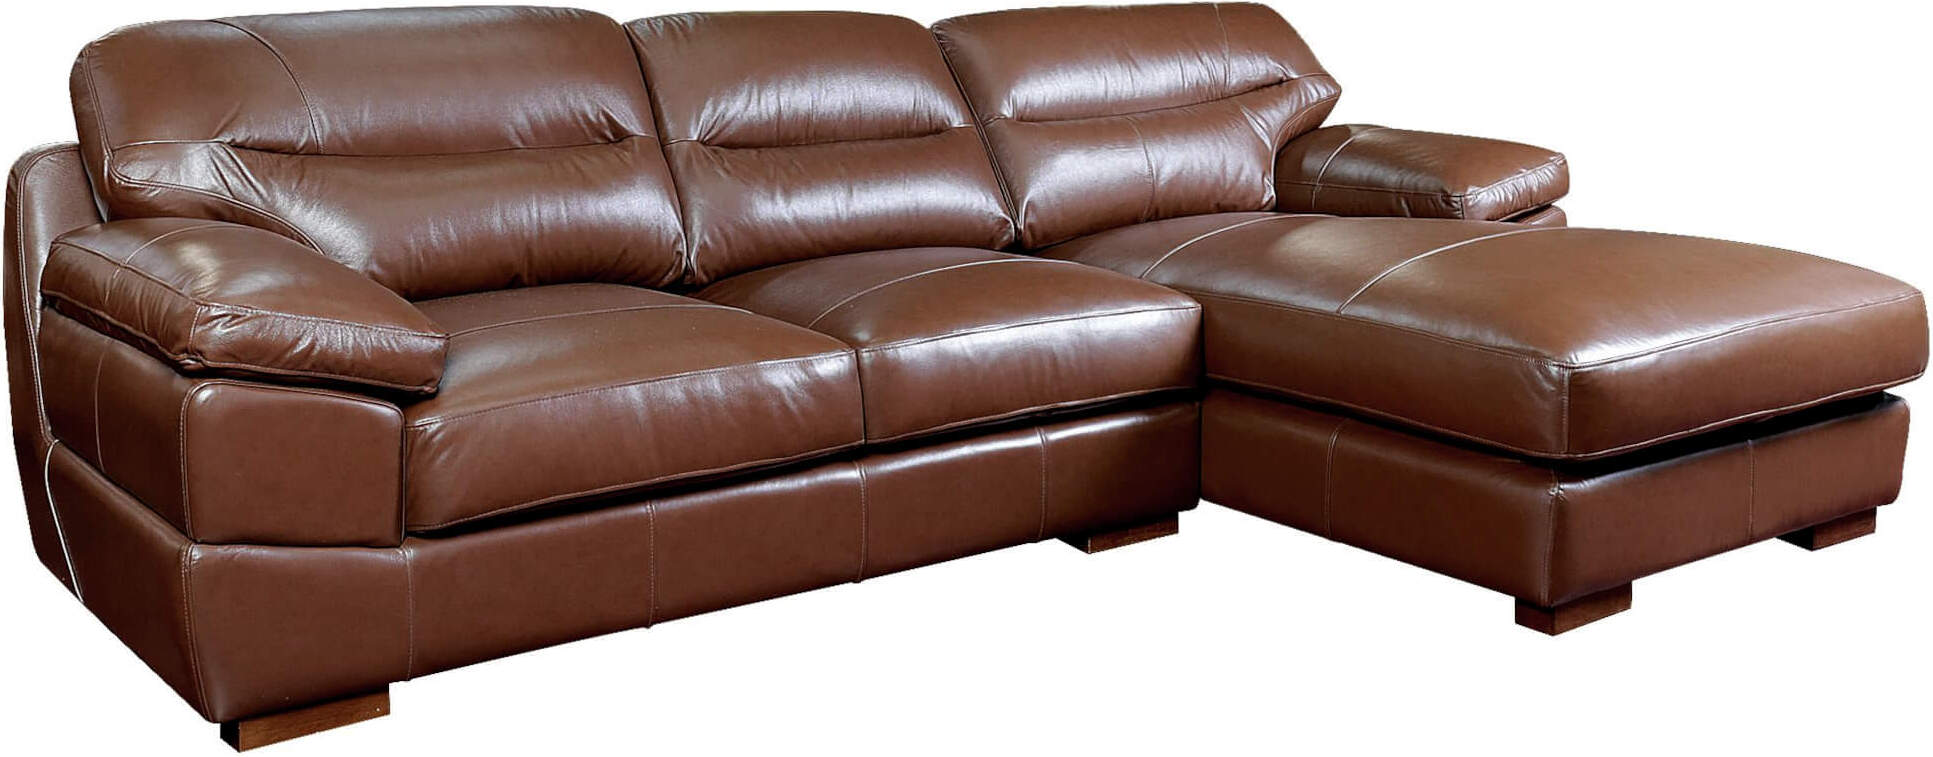 Deep Seating Couch Sectional